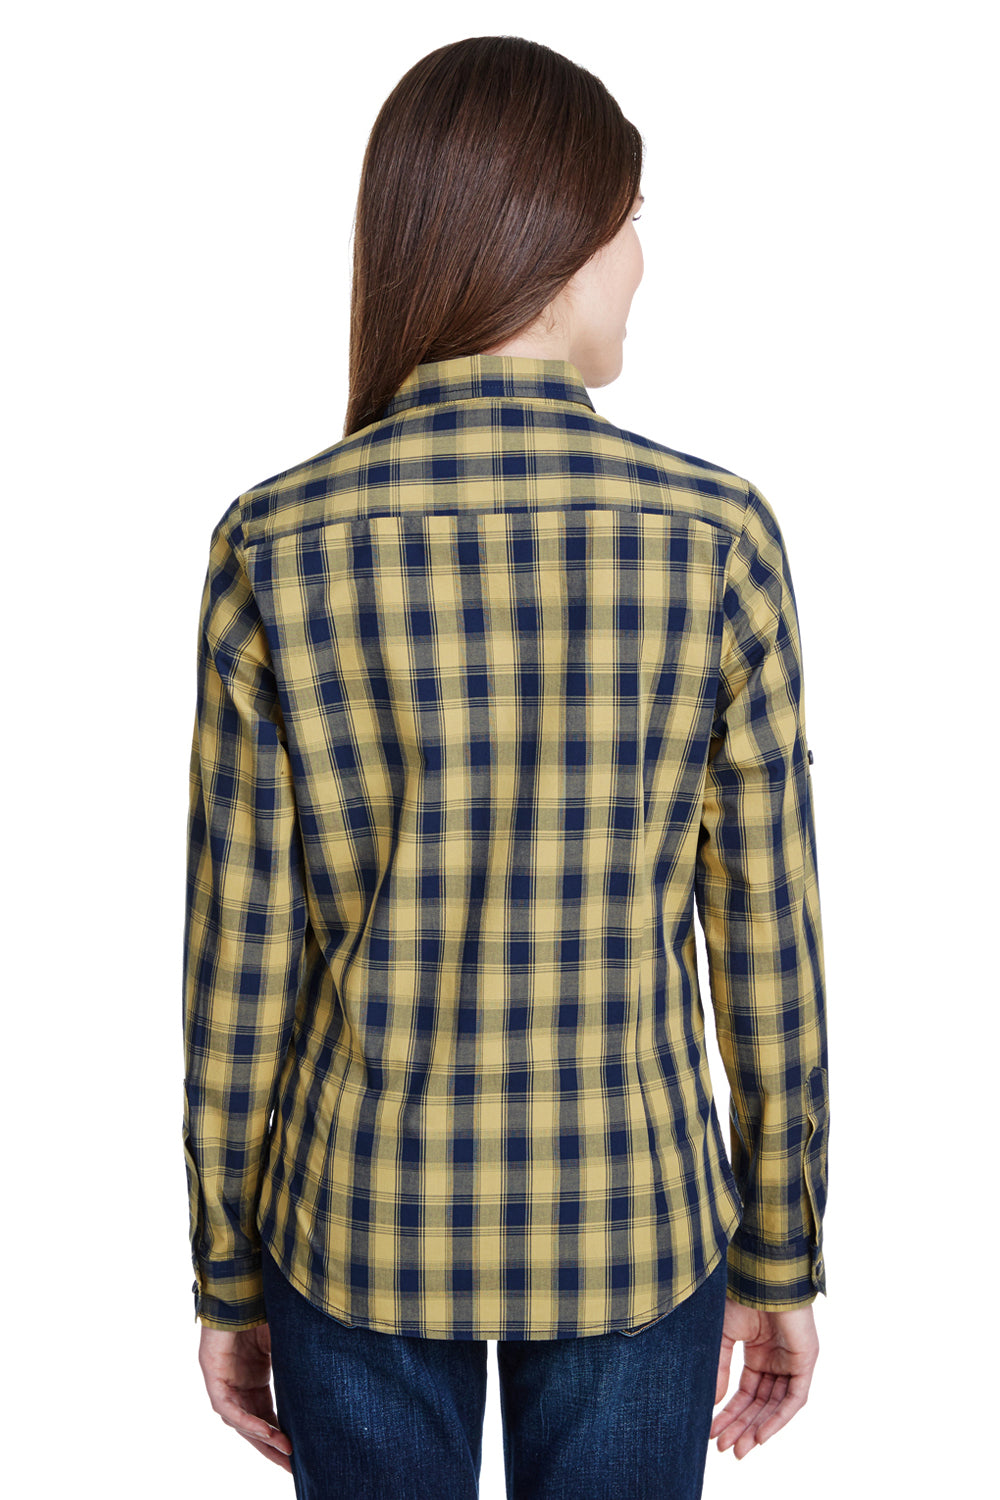 Artisan Collection RP350 Womens Mulligan Check Long Sleeve Button Down Shirt Camel Brown/Navy Blue Model Back